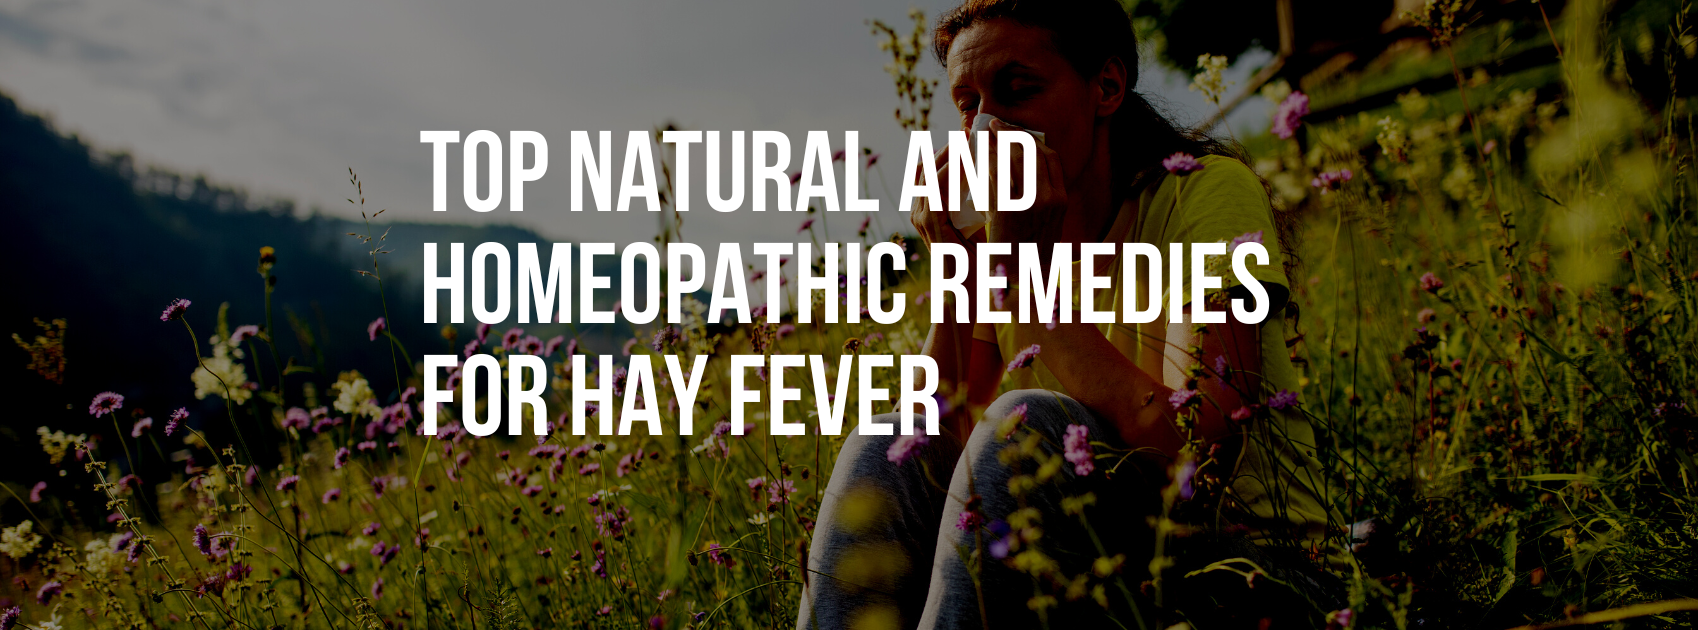 Top Natural and Homeopathic Remedies for Hay Fever: Say Goodbye to Allergy Symptoms!